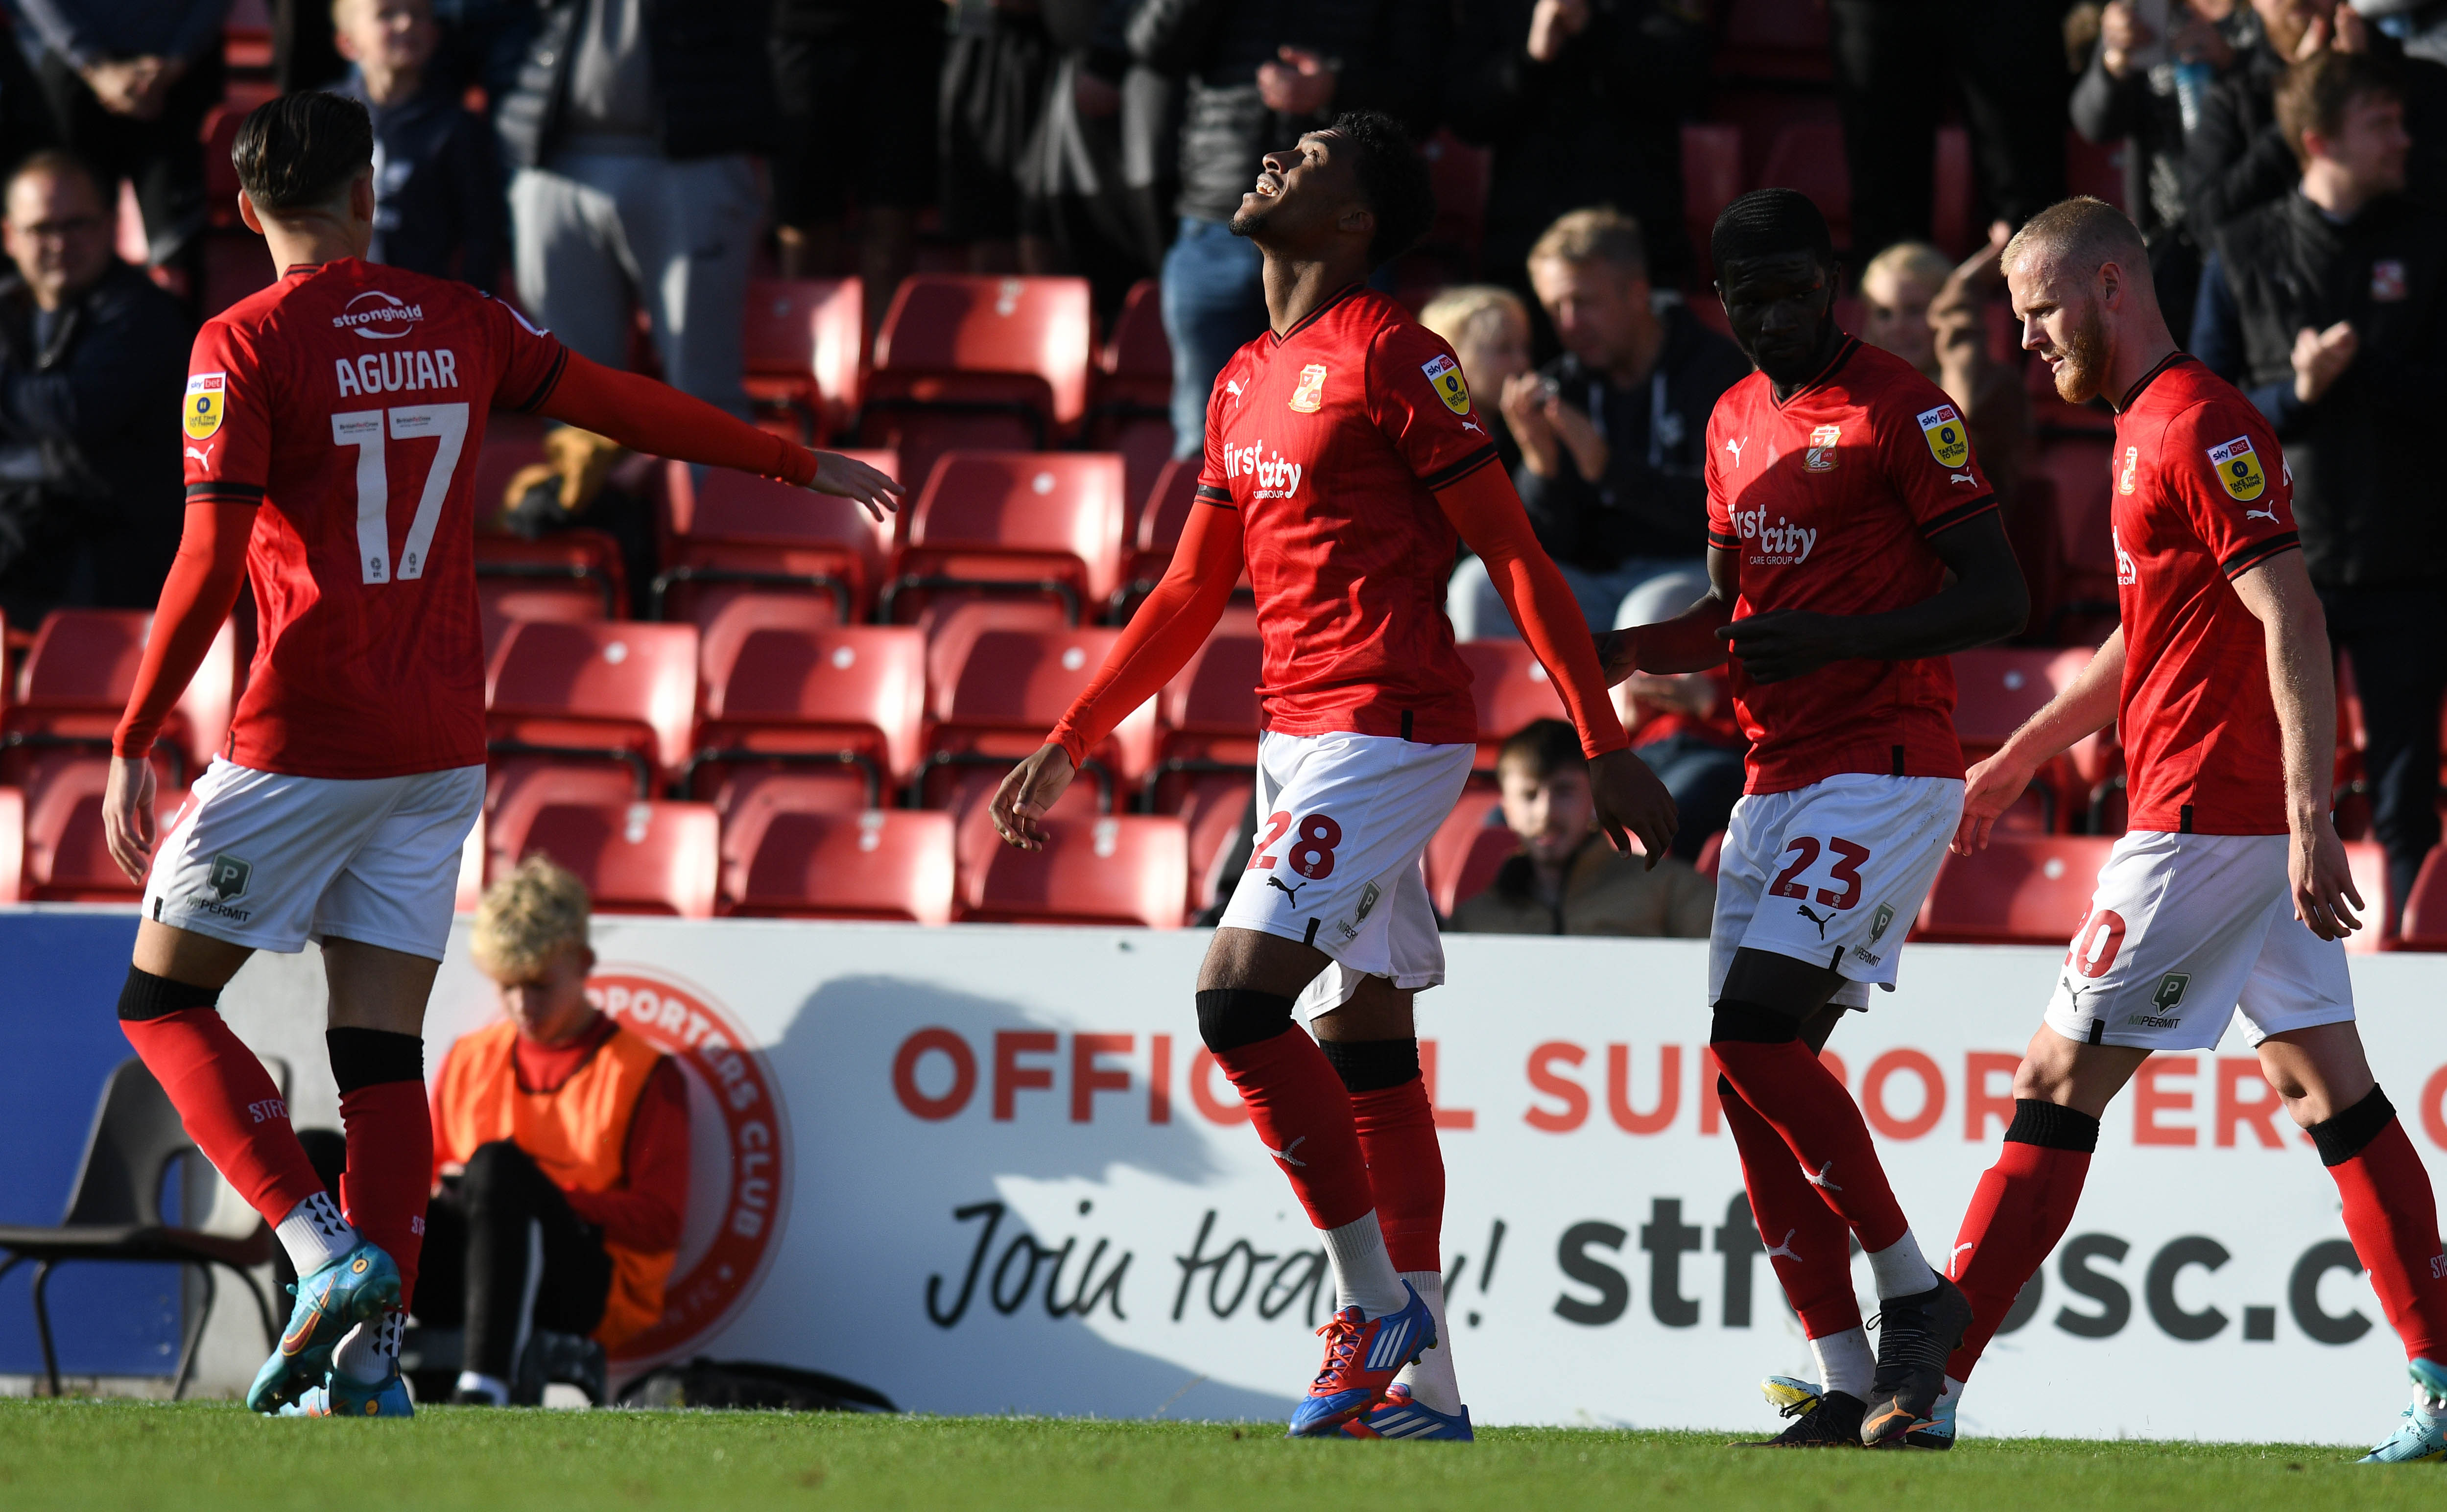 PLAYER RATINGS: Swindon (1) Colchester United (0)